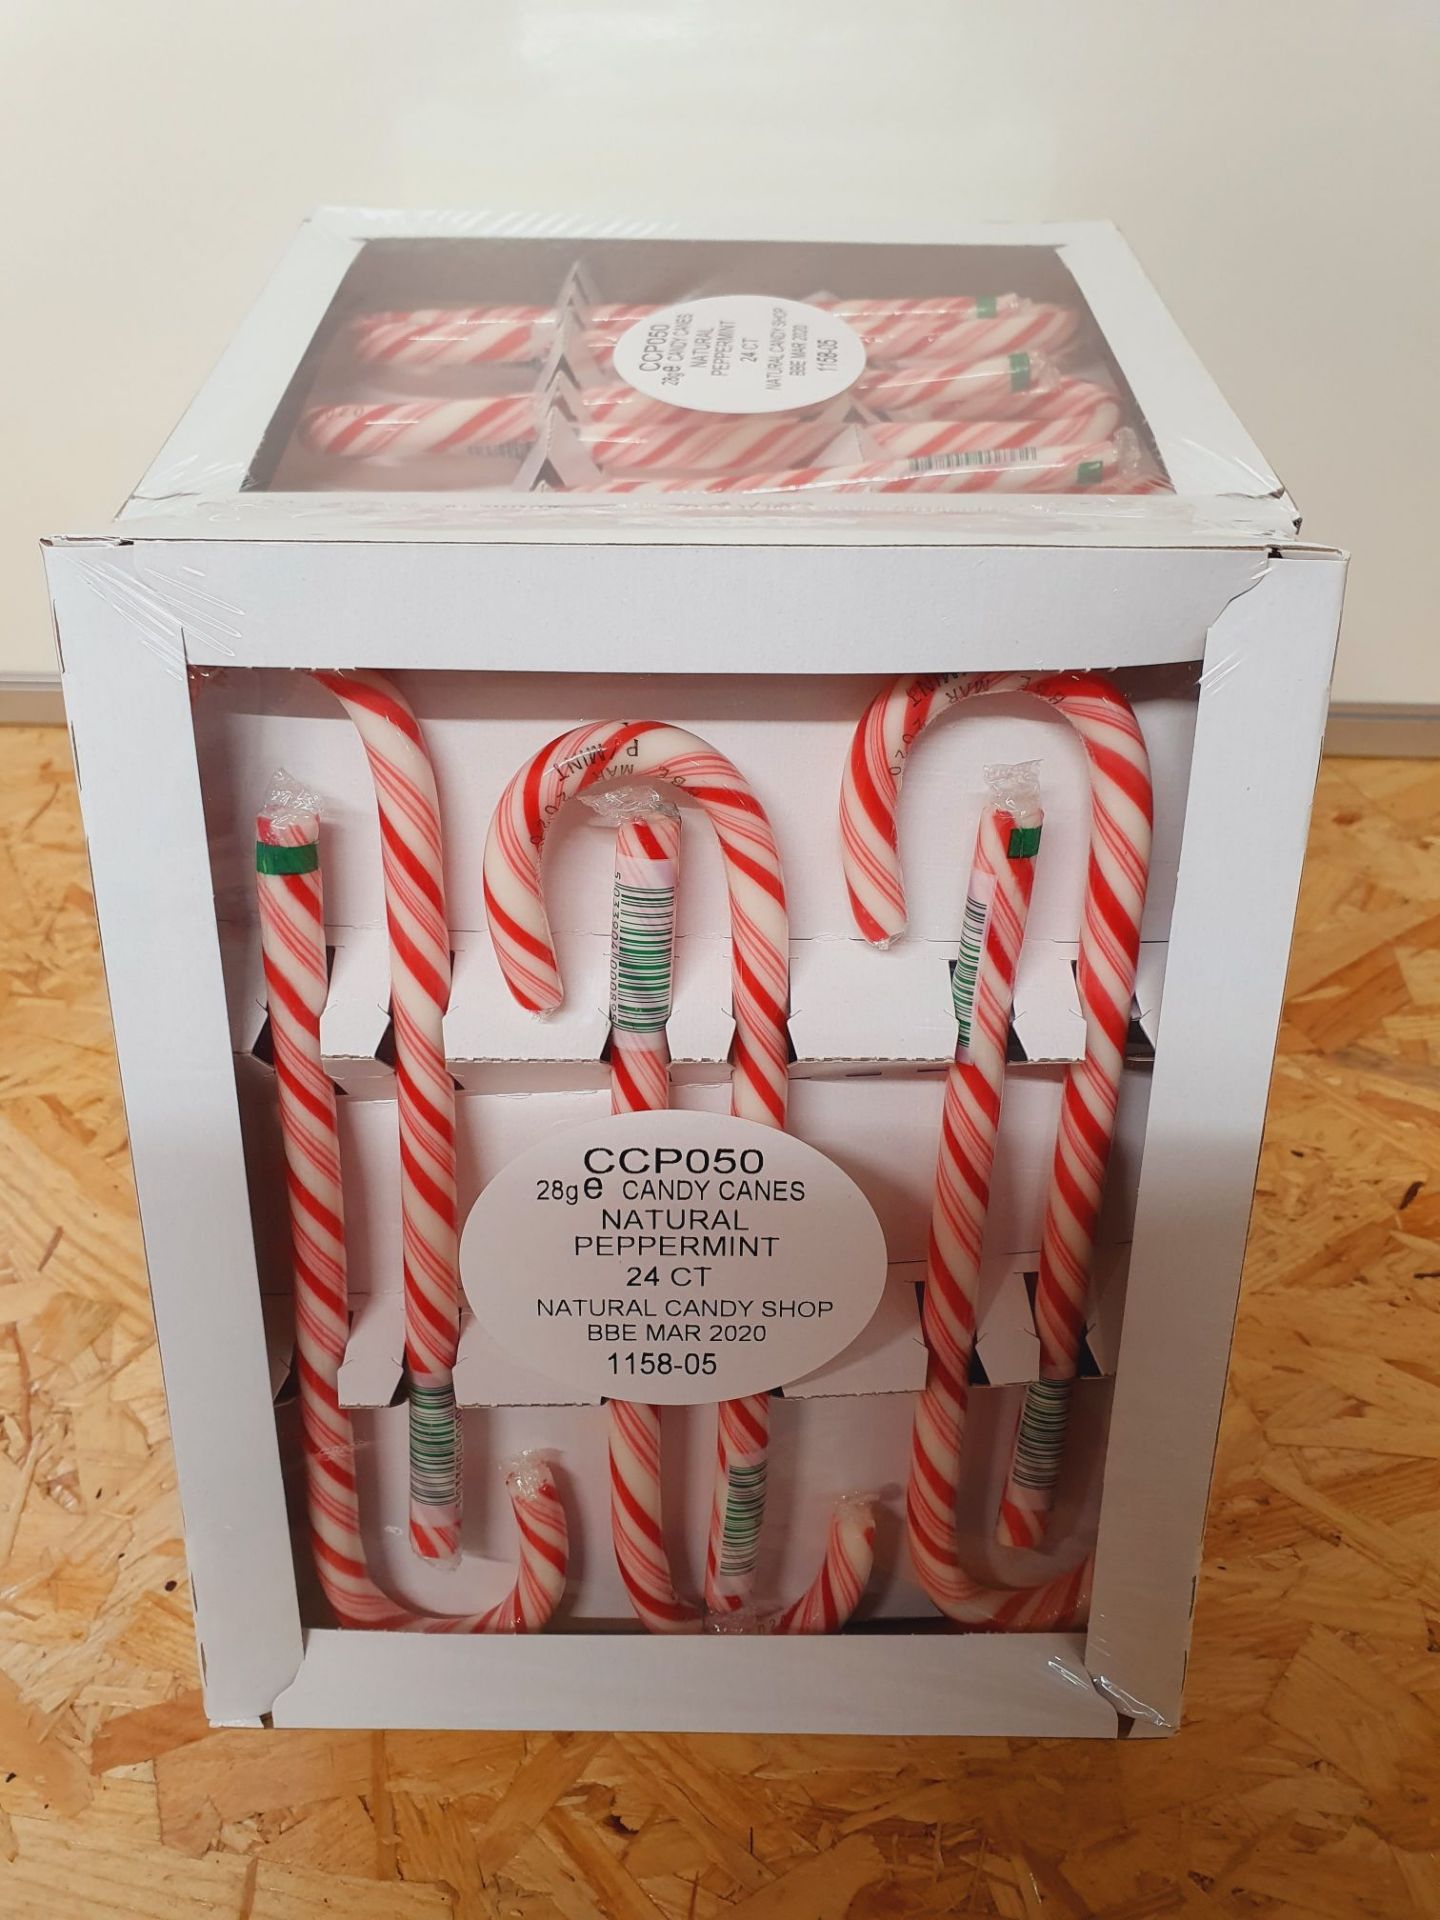 ONE LOT TO CONTAIN FOUR X4 PACKS OF CANDY CANES. 24 IN EACH BOX, 96 PER LOT. BEST BEFORE MARCH 2020